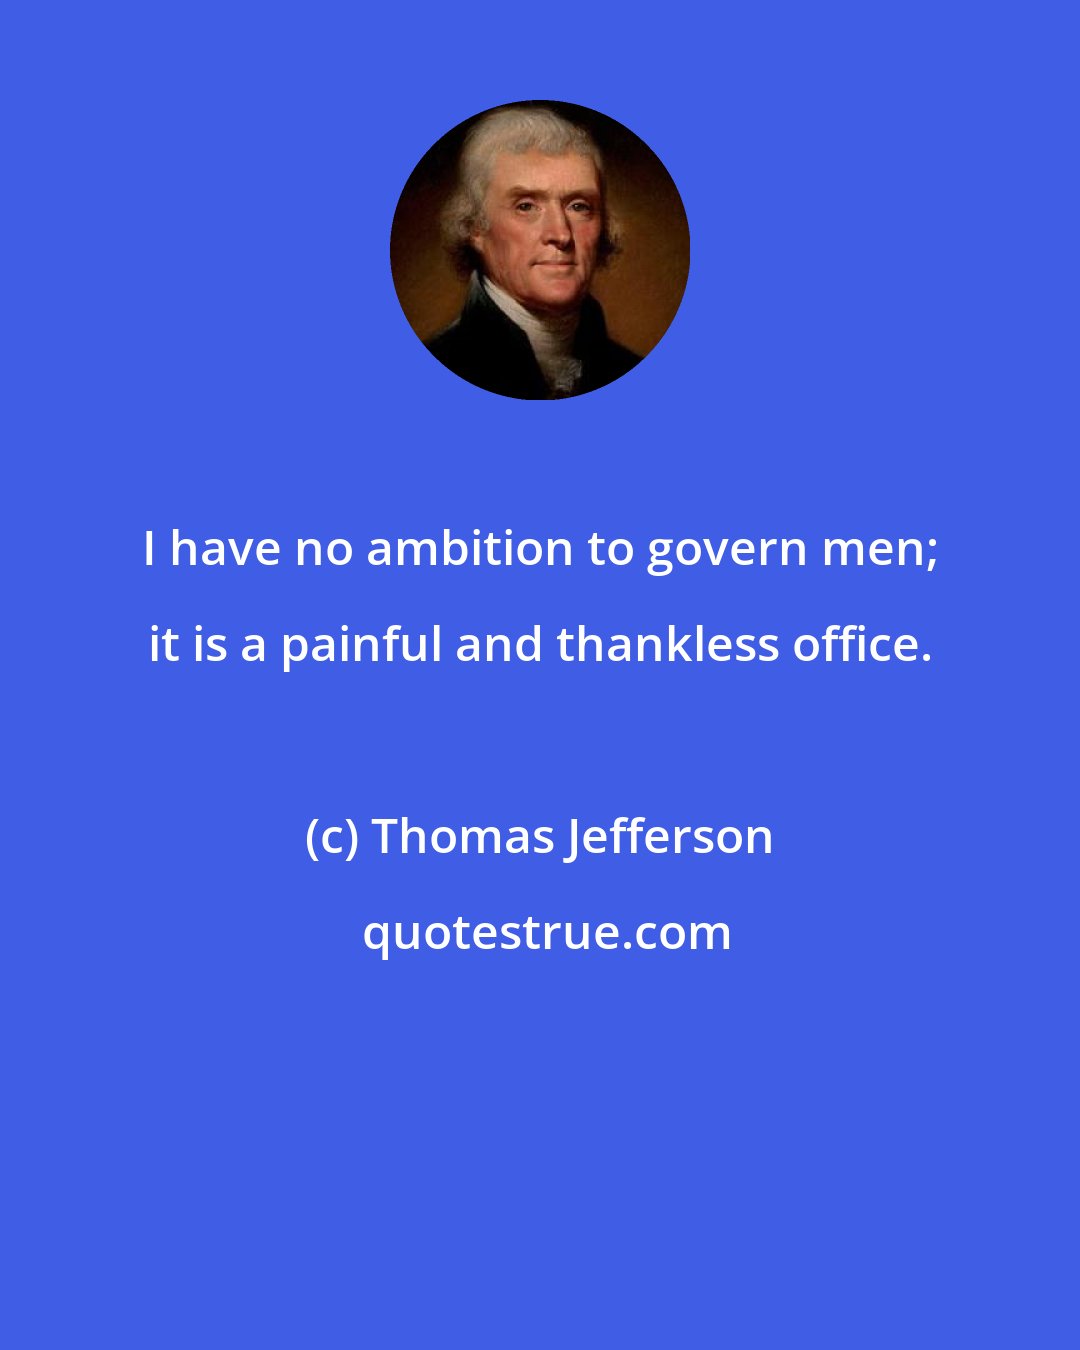 Thomas Jefferson: I have no ambition to govern men; it is a painful and thankless office.